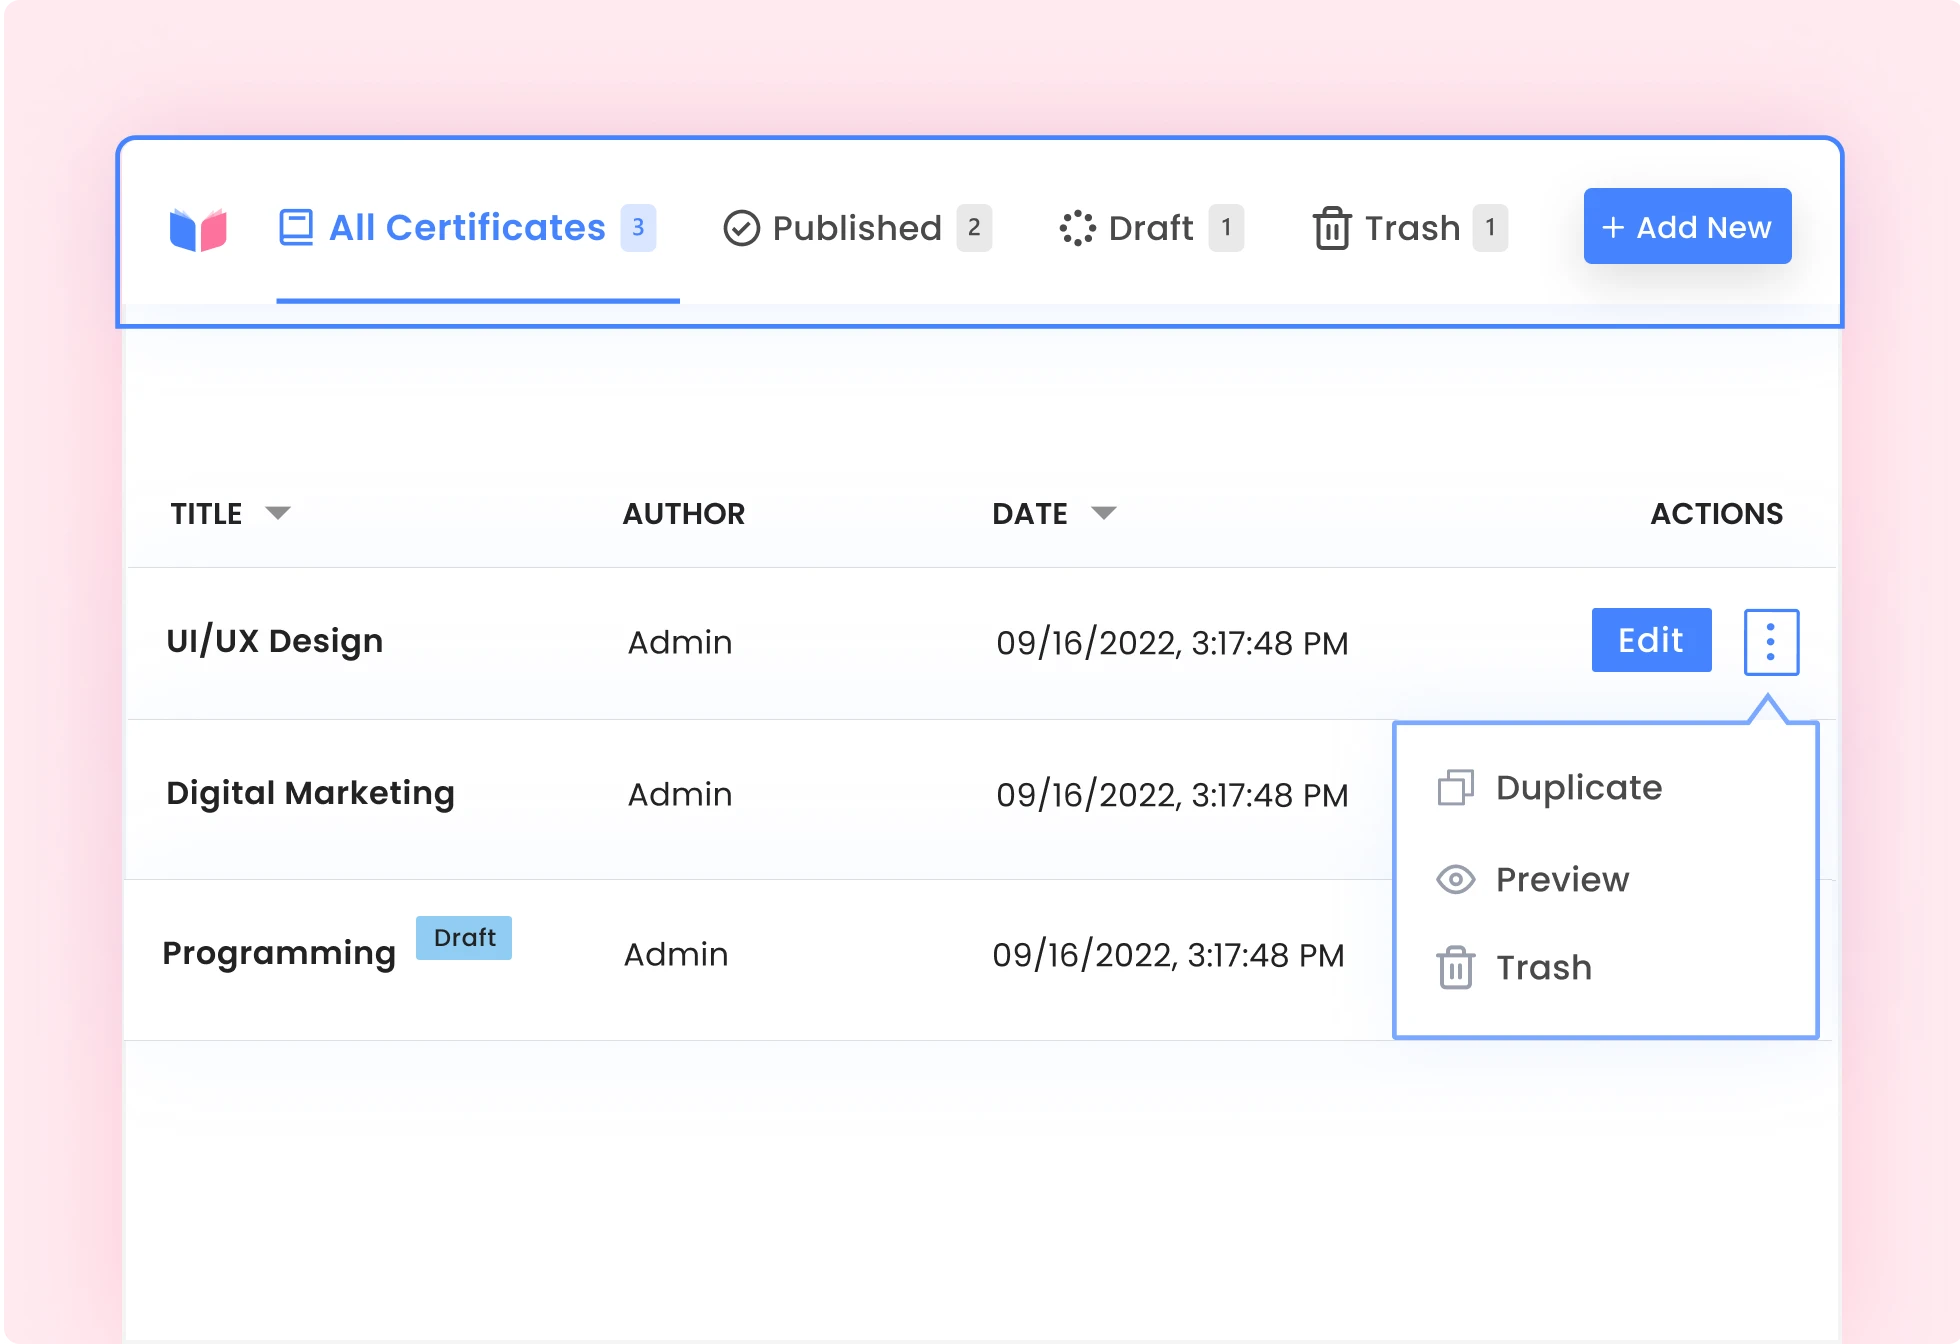 Manage All Certificates from One Place